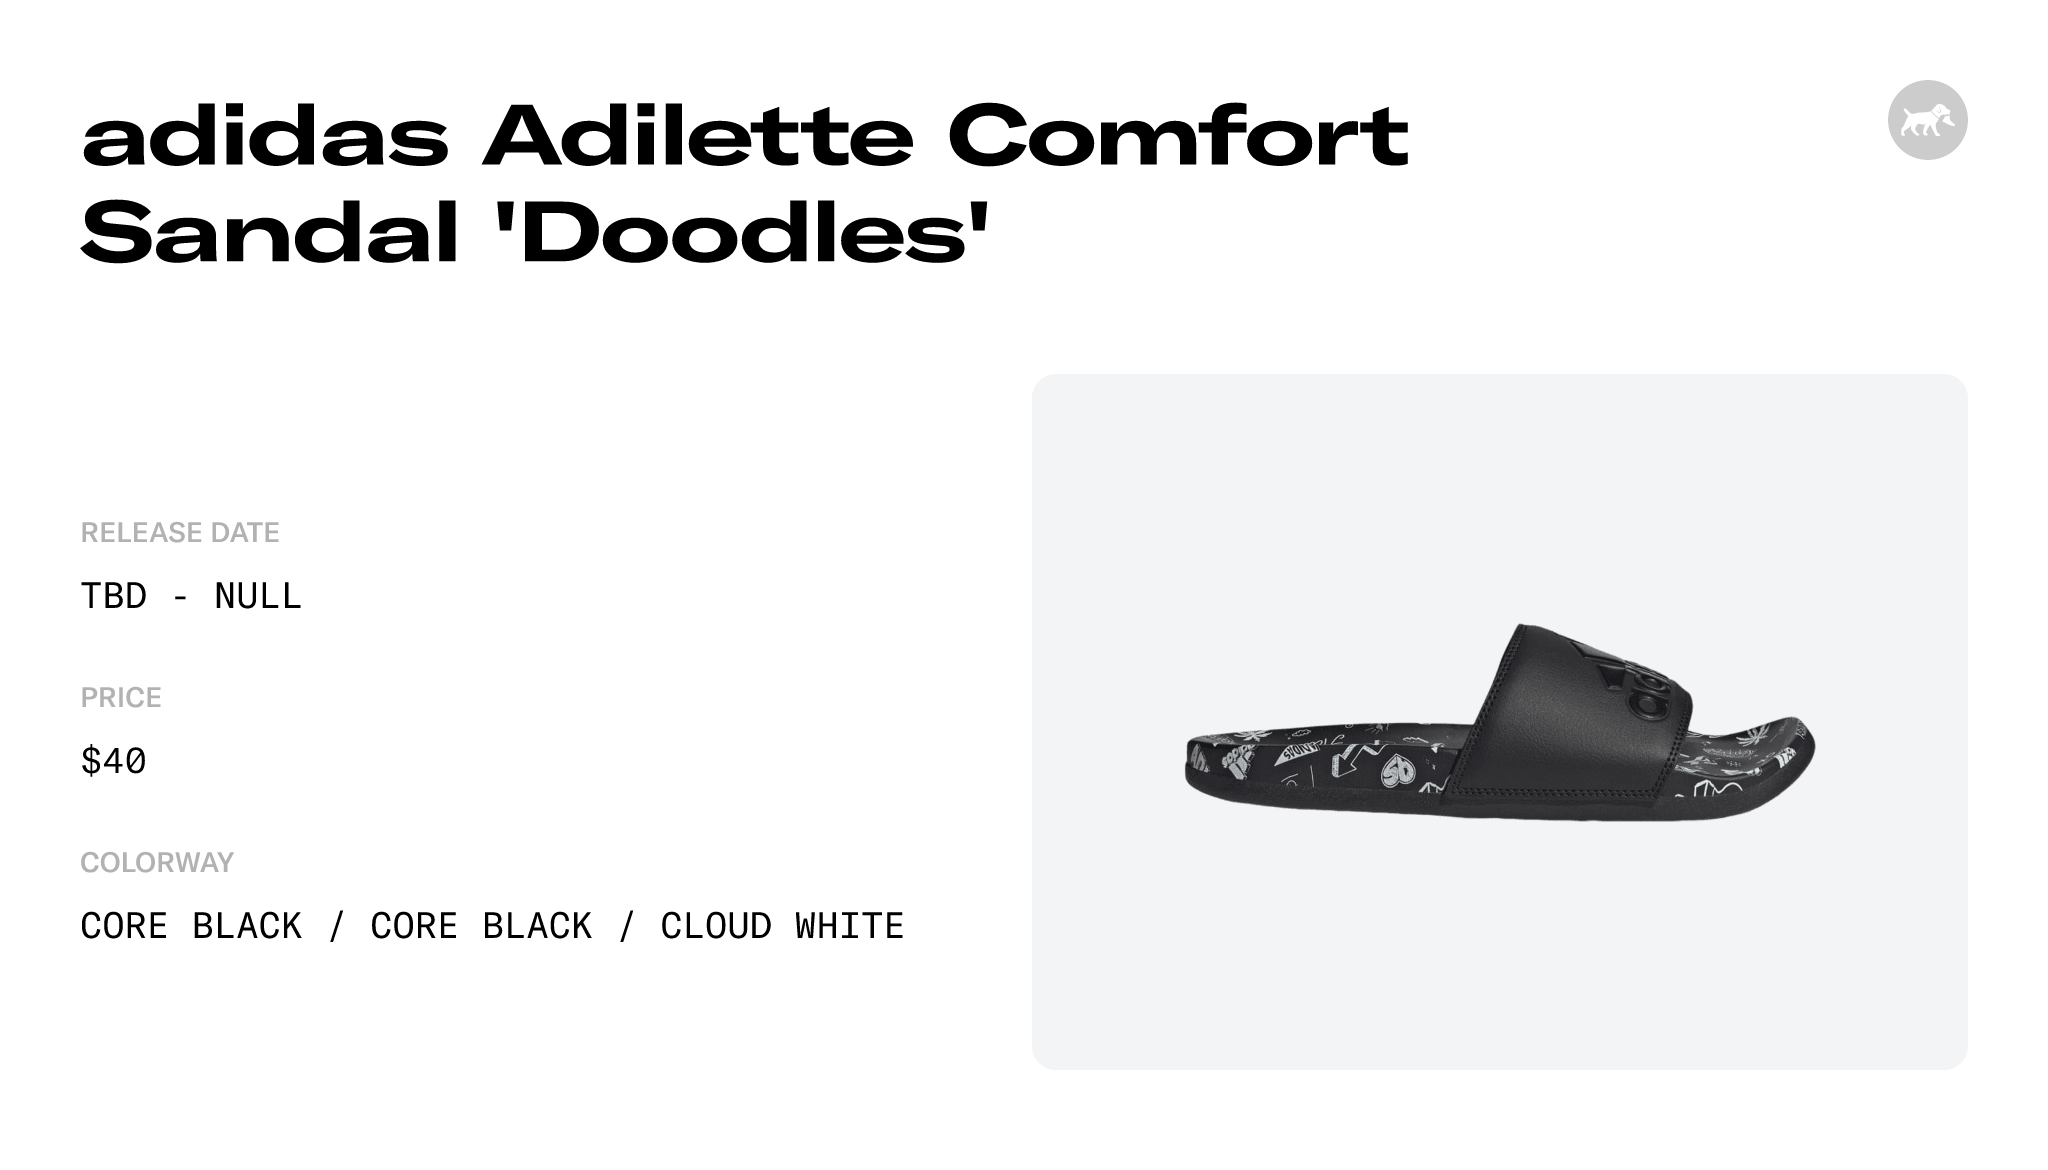 adidas Adilette Comfort Sandal 'Doodles' - IF3057 Raffles and Release Date